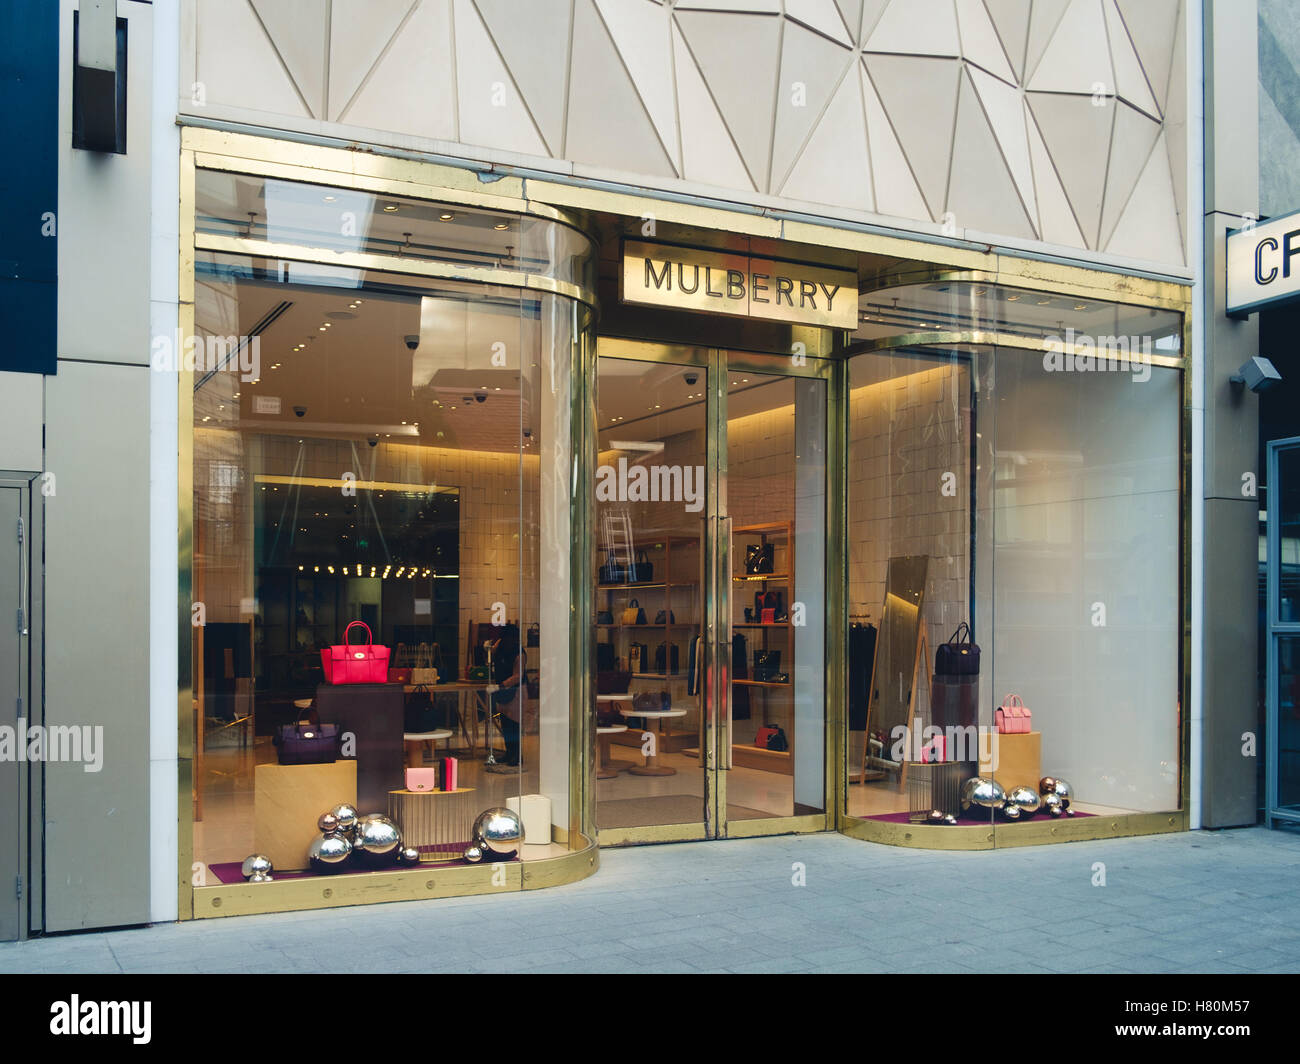 Mulberry designer goods store in Westfield Stratford, East London, UK Stock Photo - Alamy